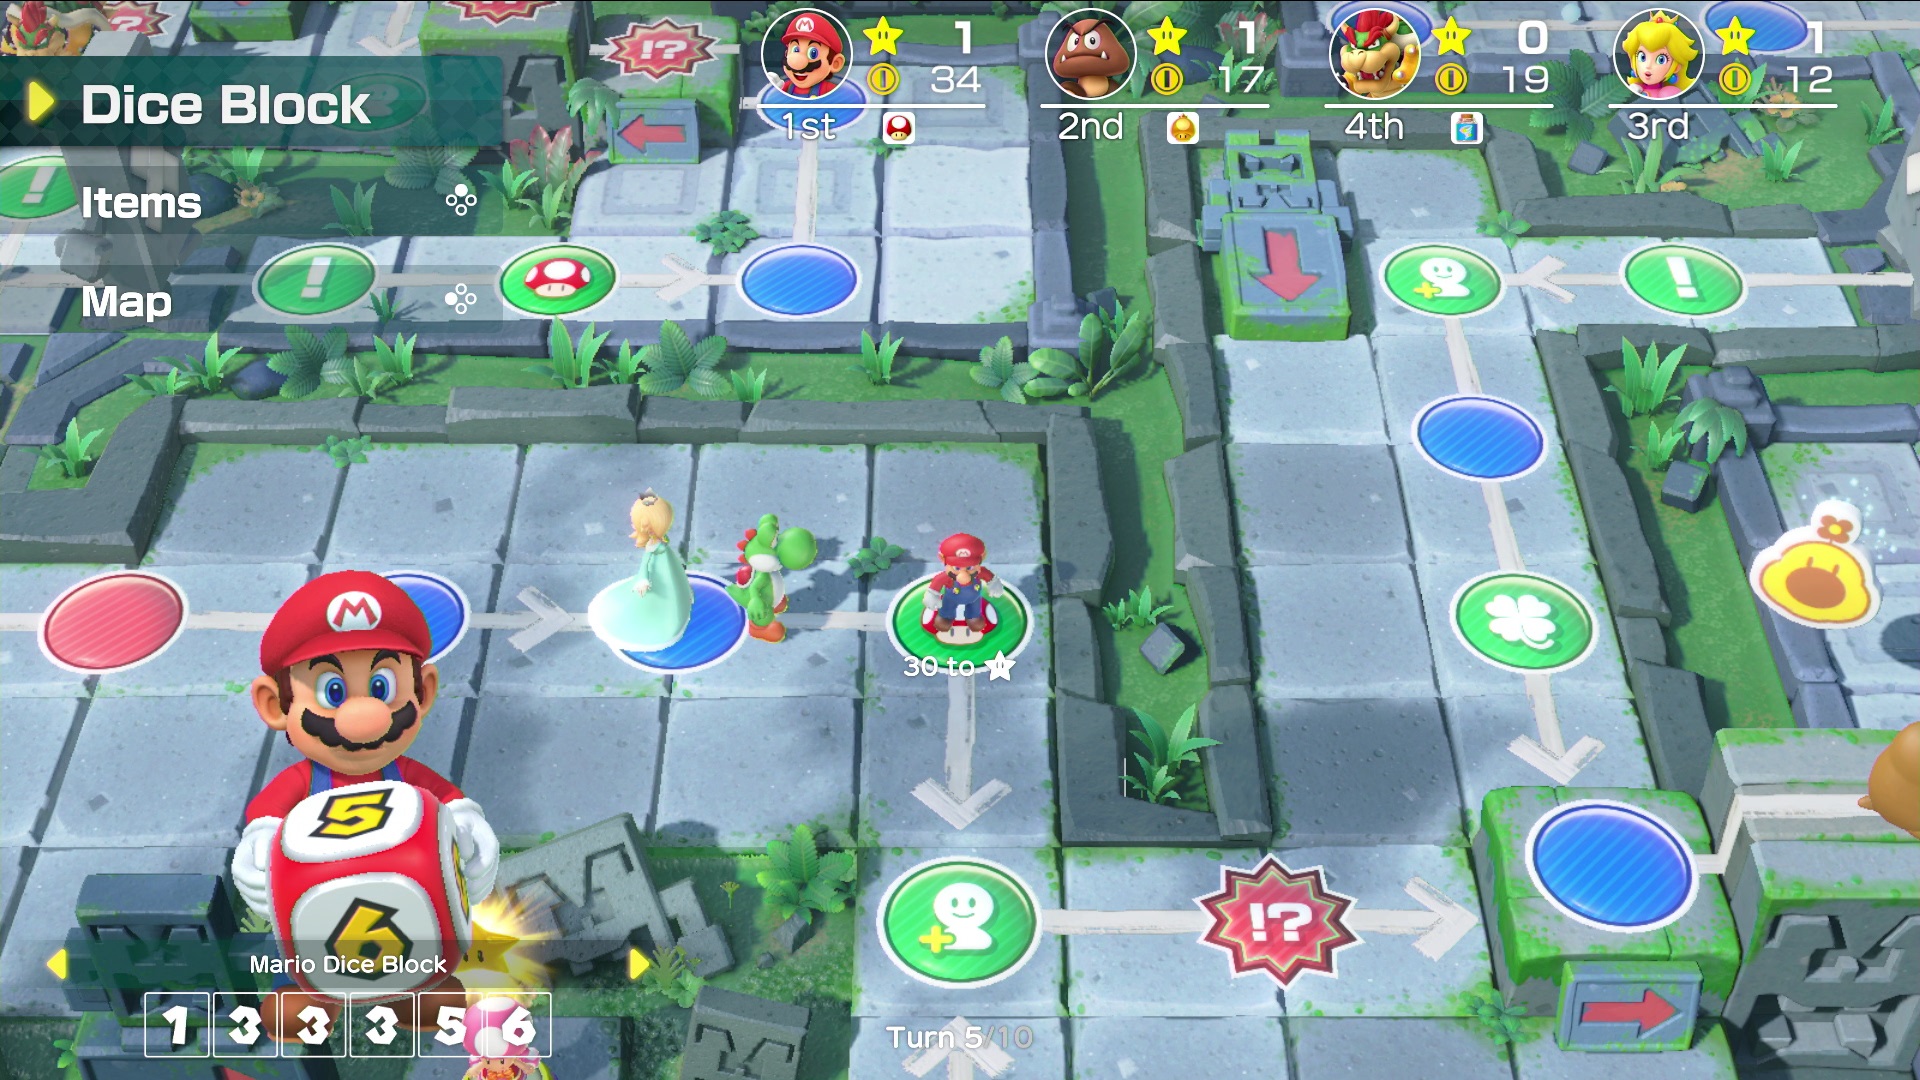 All 80 Minigames (Bowser Jr. gameplay)